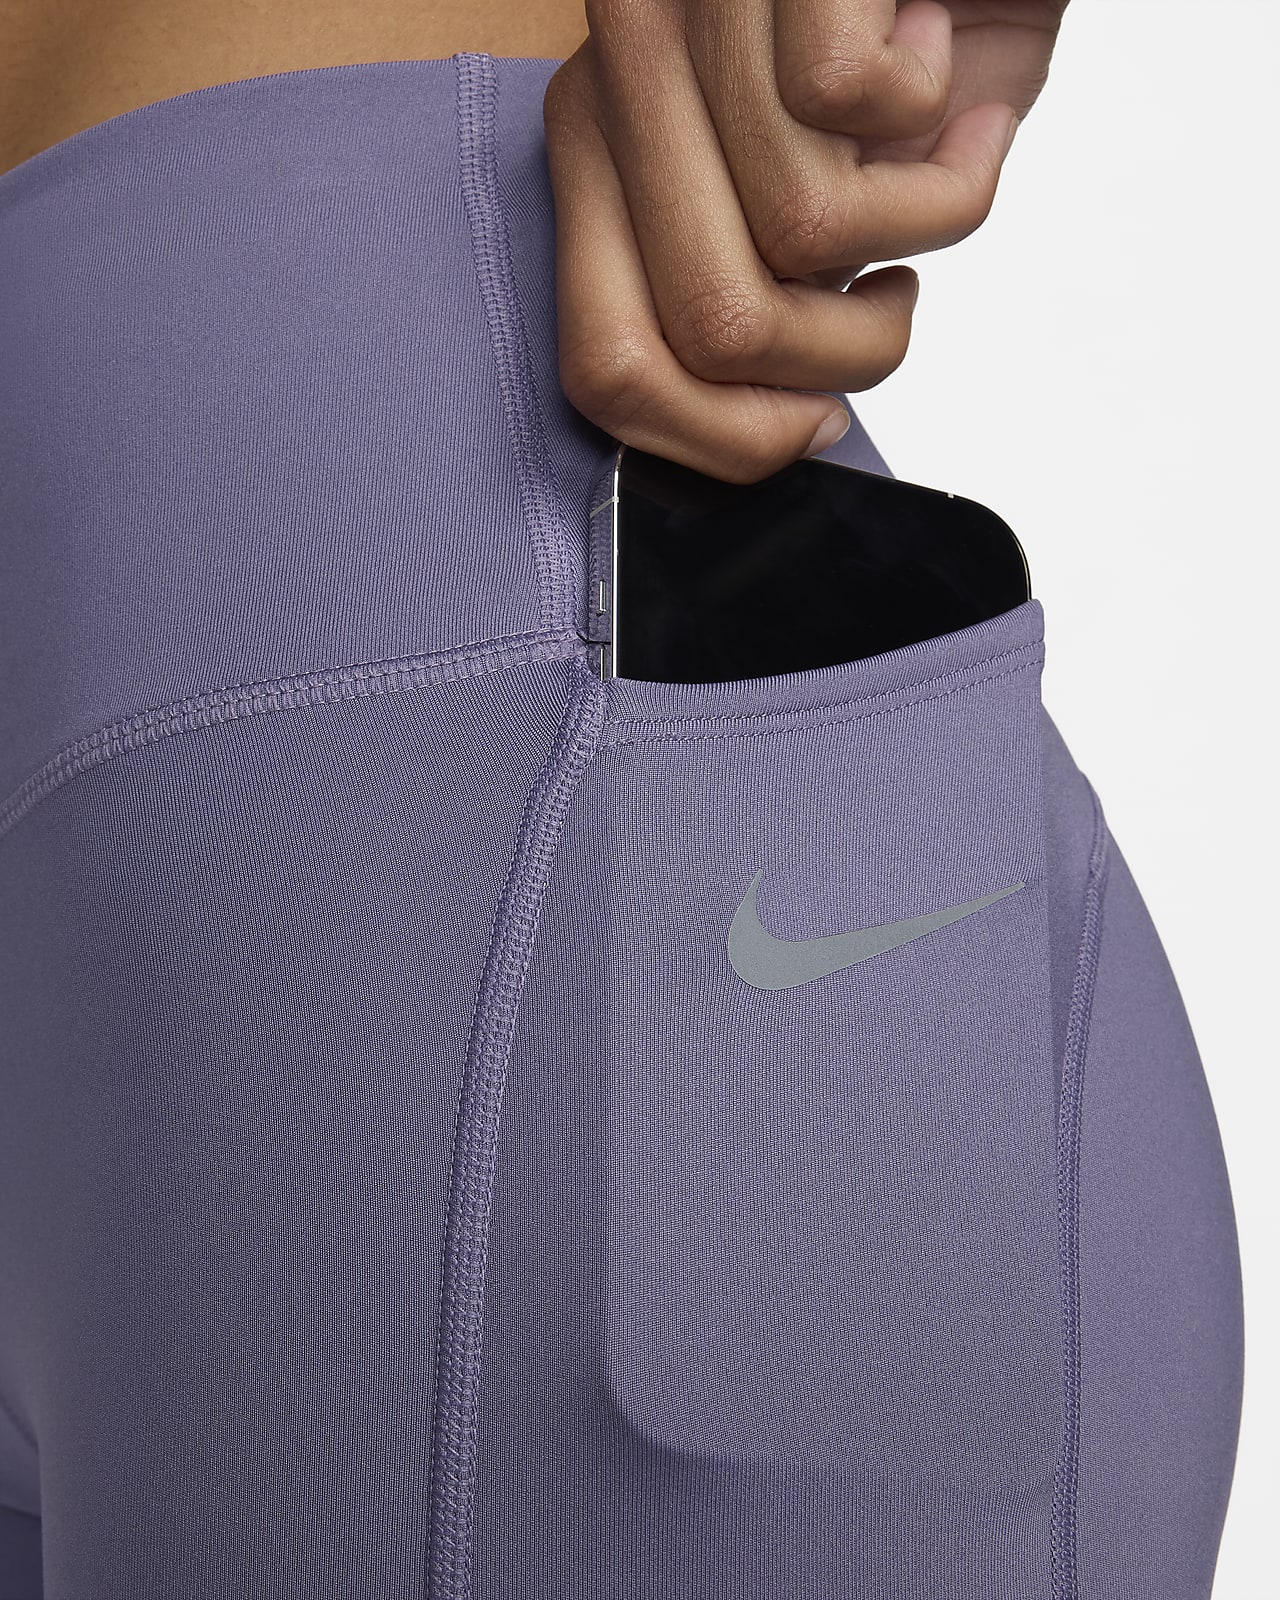 WMNS) Nike Power Epic LUX Luxury Dri-FIT Quick Dry Fitness Pants